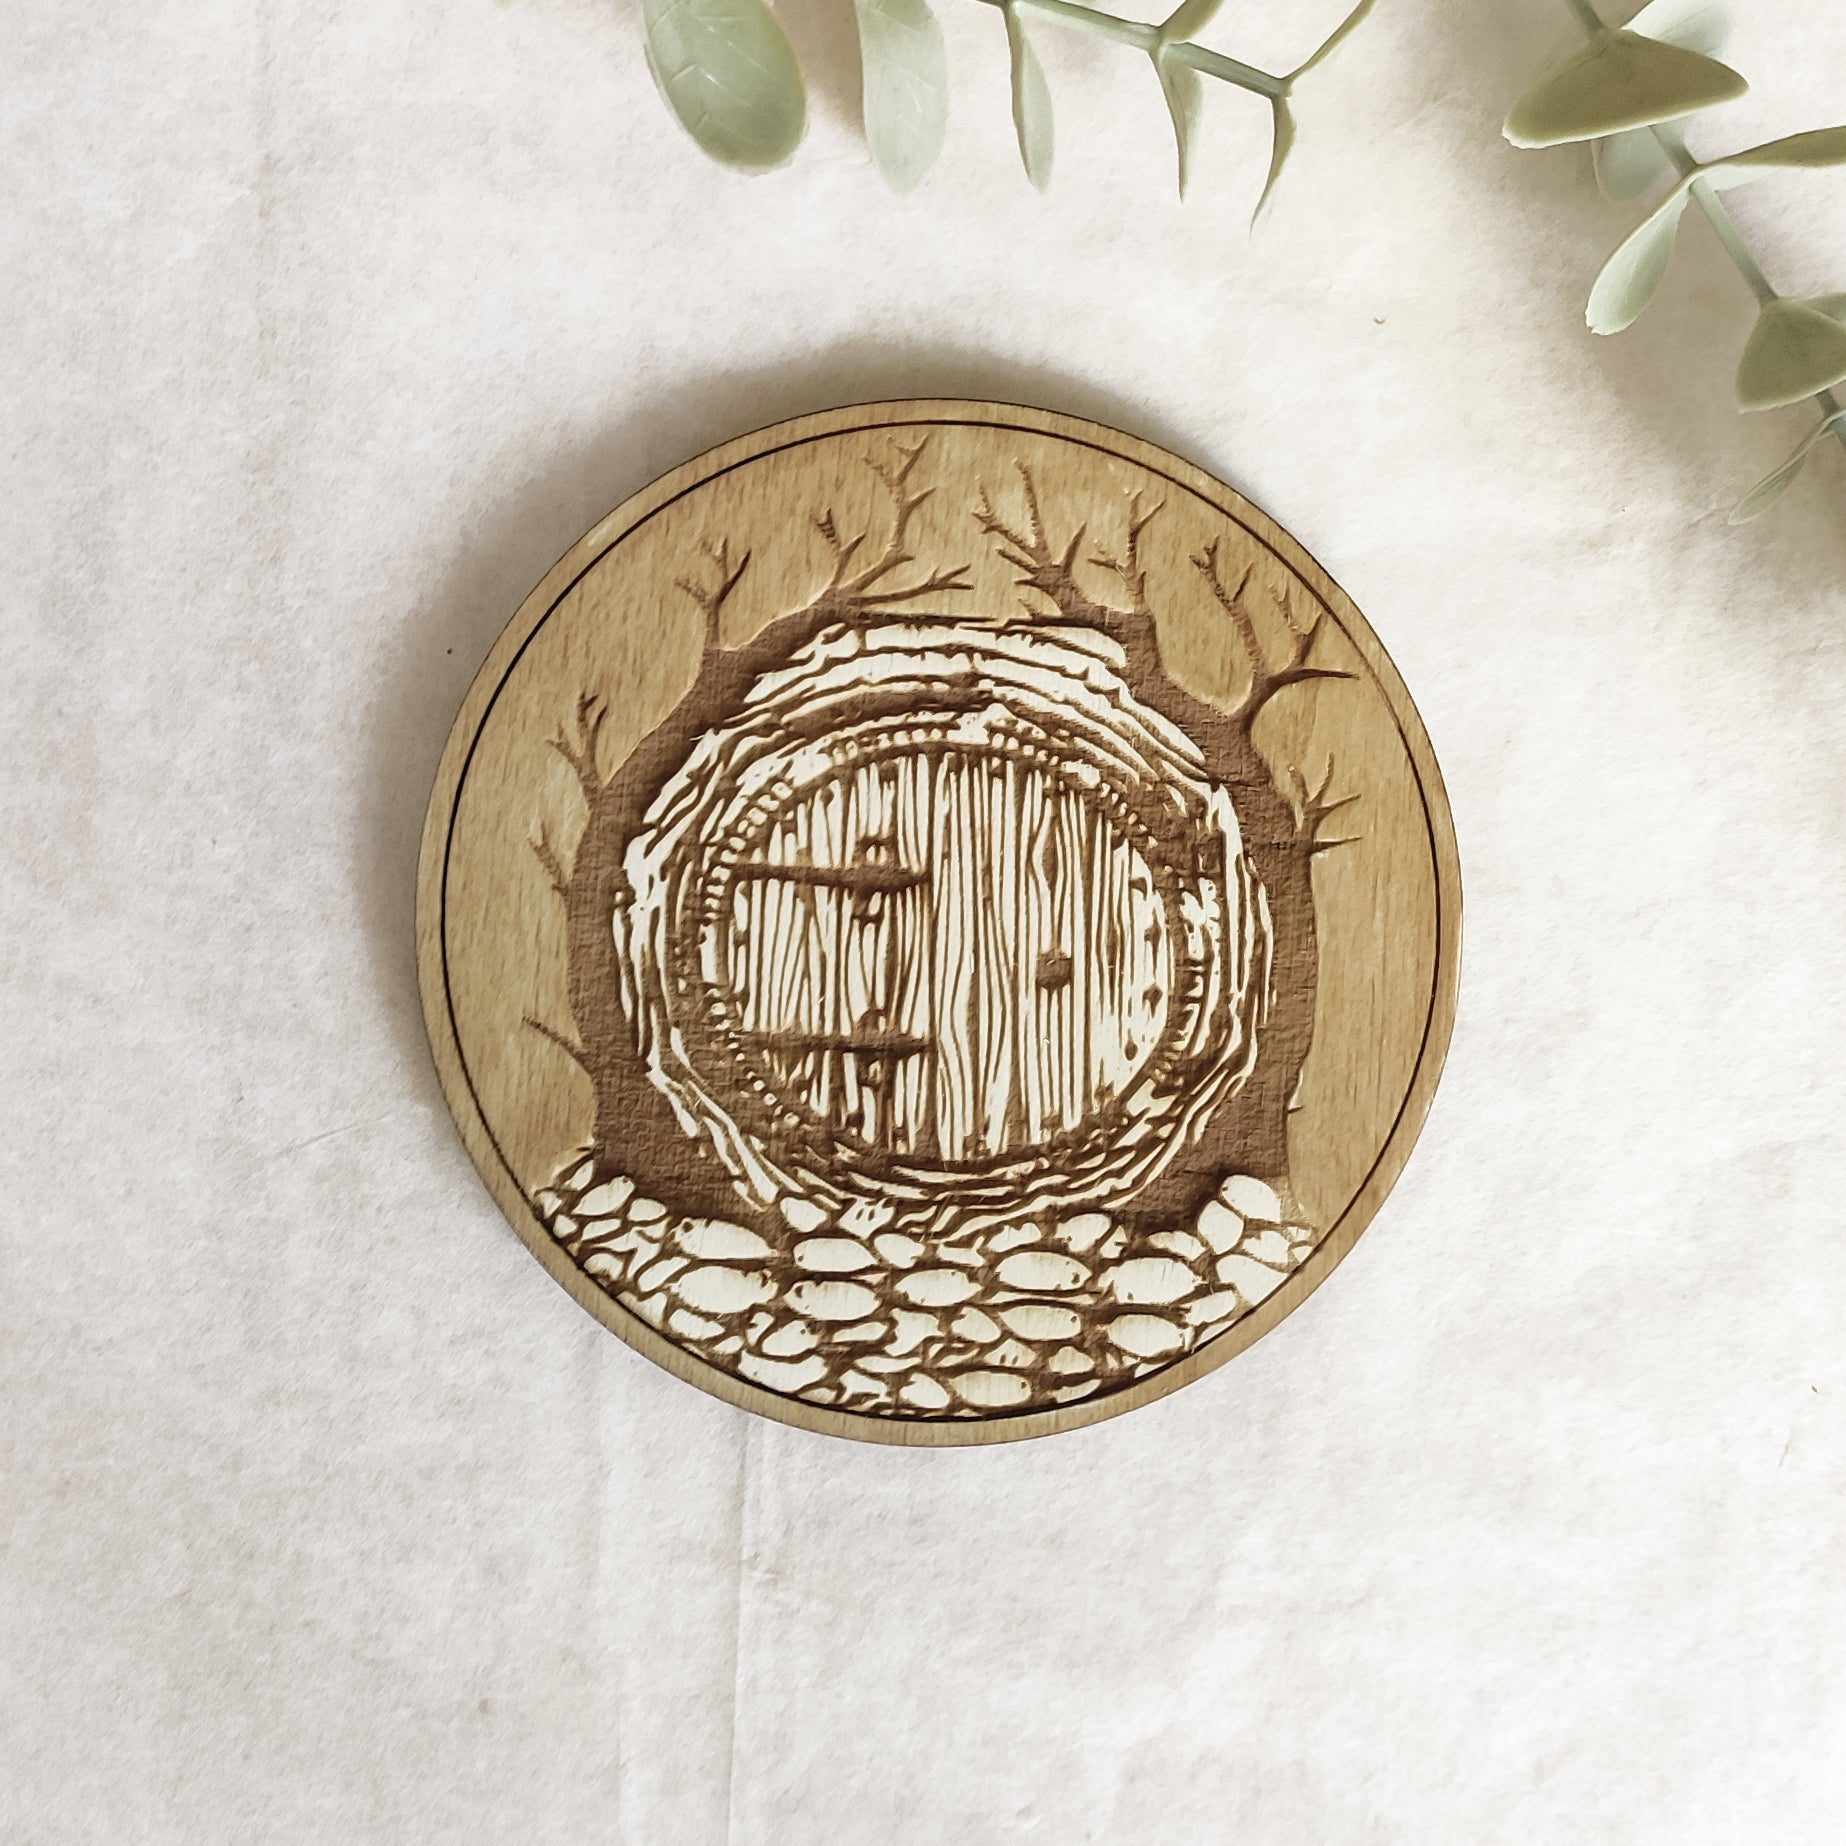 Set of 6 Lord of The Rings Wooden Coasters - Handmade Gift - Housewarming - Wood Kitchenware - LOTR